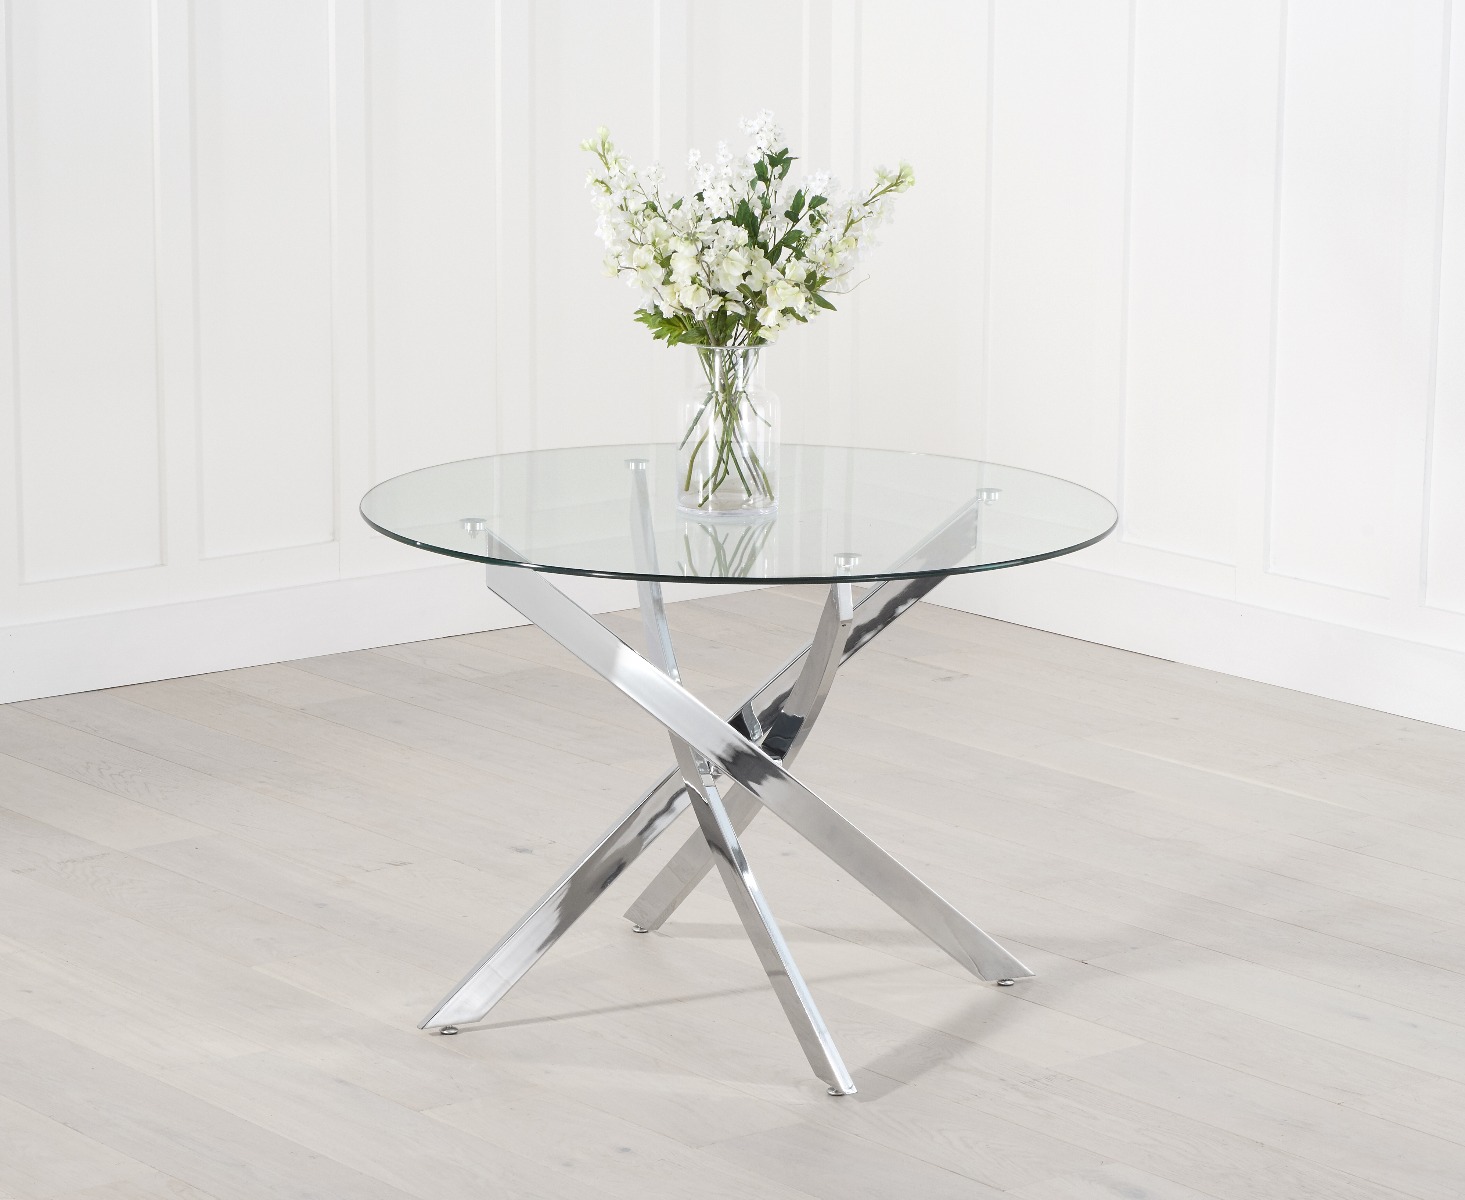 Photo 5 of Denver 110cm glass dining table with 4 white vigo chairs